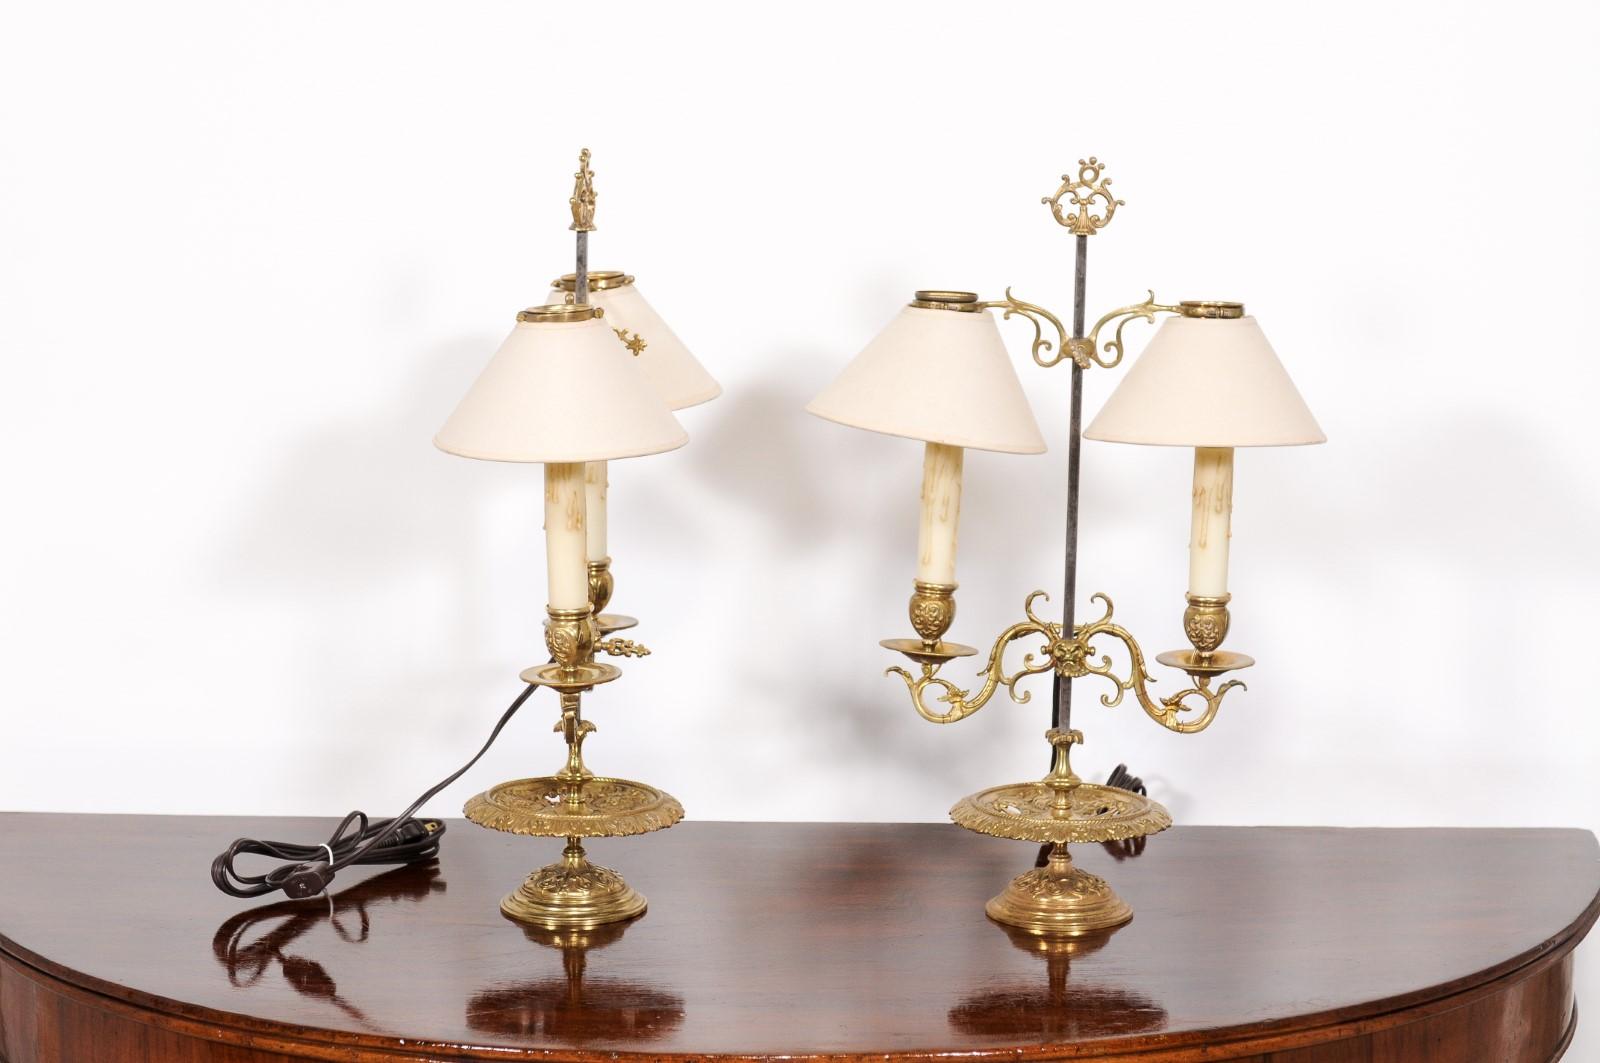 French 19th Century Brass Candlestick Lamps with Scrolling Arms, a Wired Pair For Sale 6